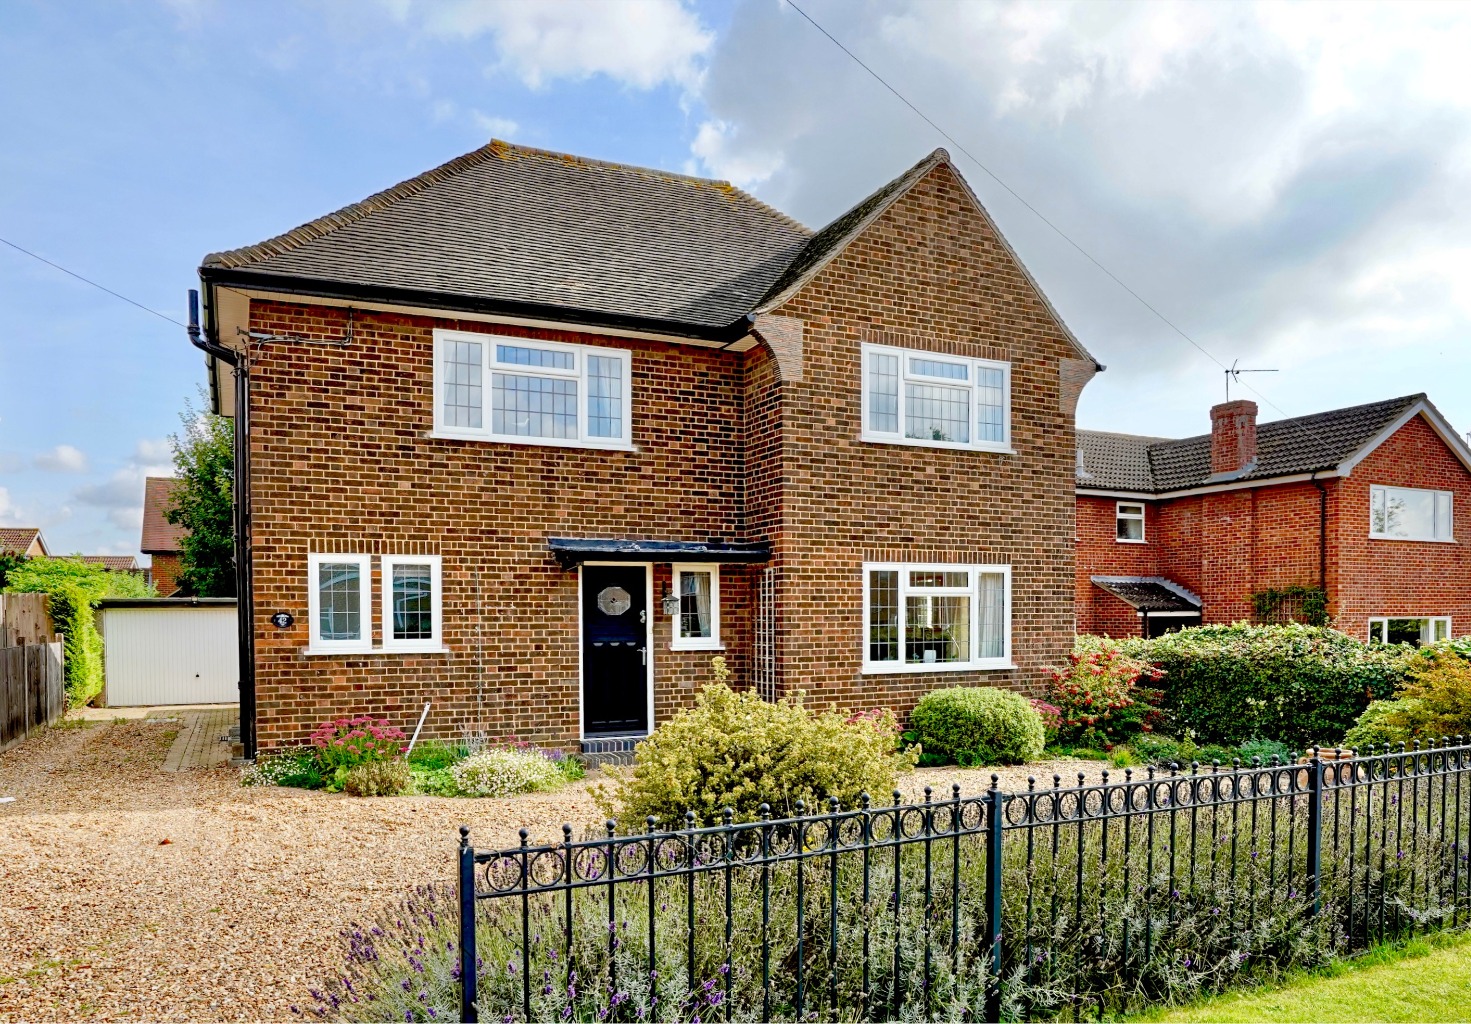 3 bed detached house for sale in Lucks Lane, St. Neots - Property Image 1